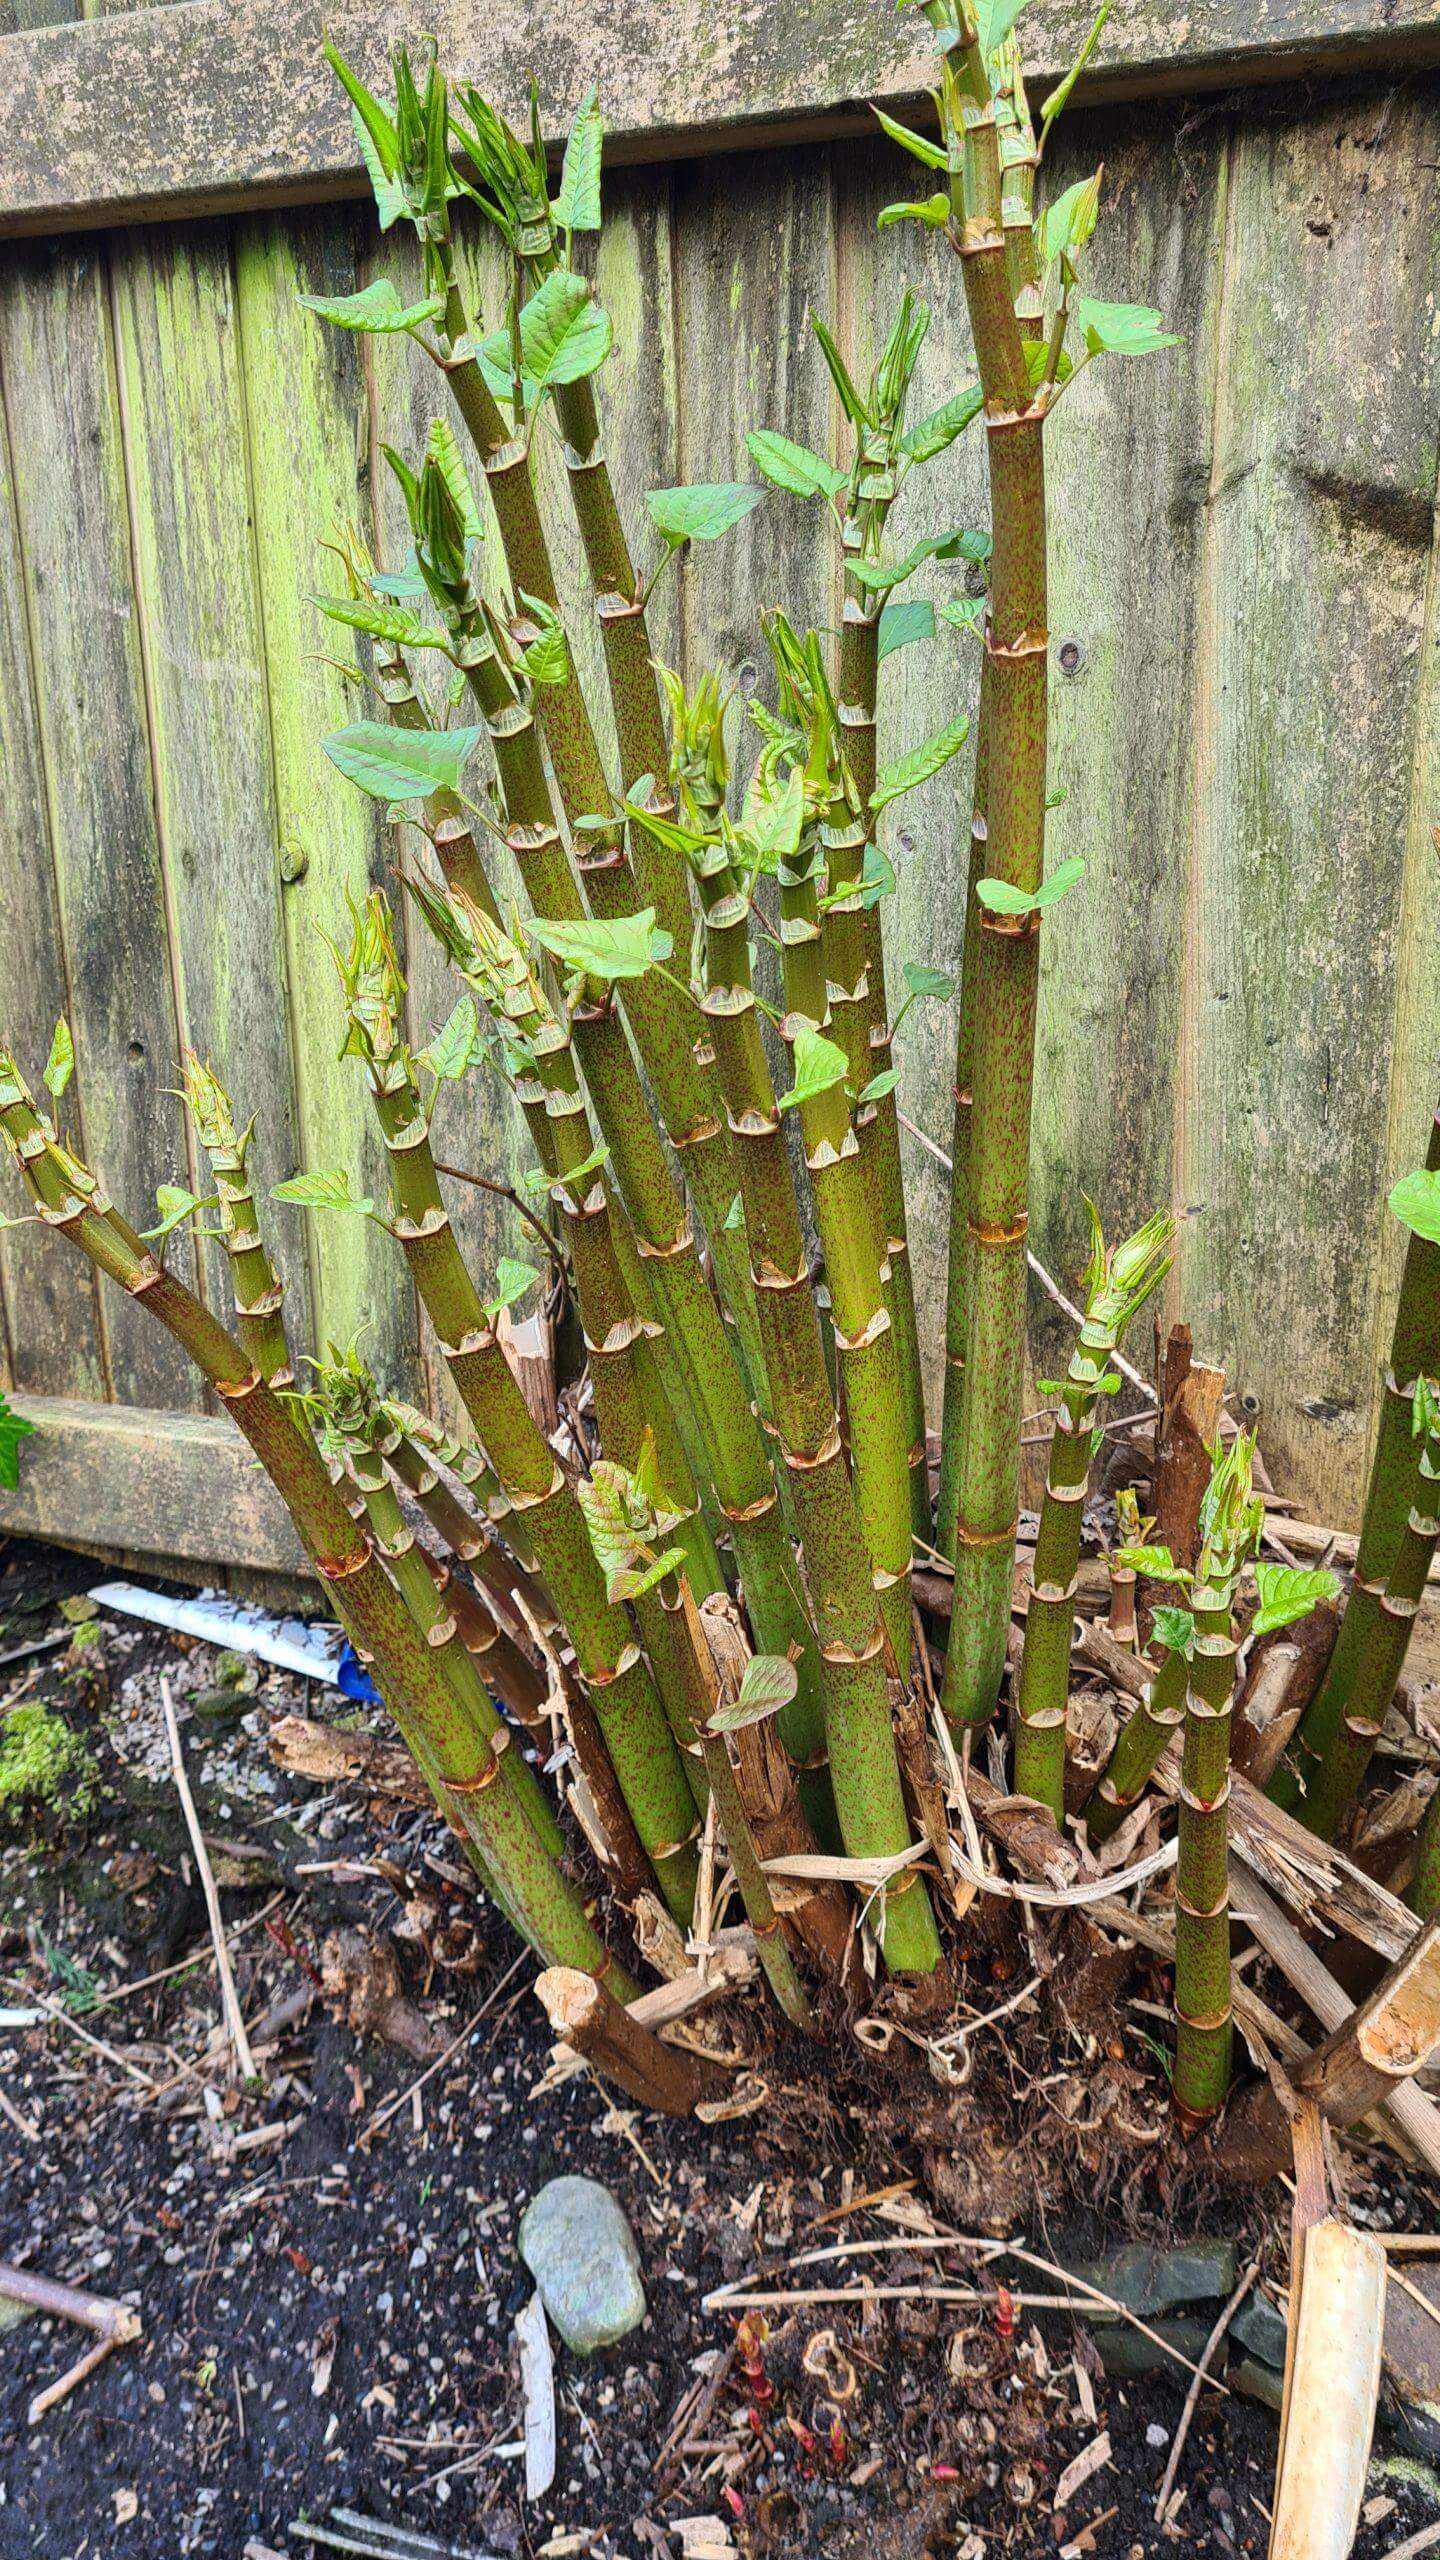 Japanese knotweed crowns extract precious nutrients from the soil and deny any other plants from thriving